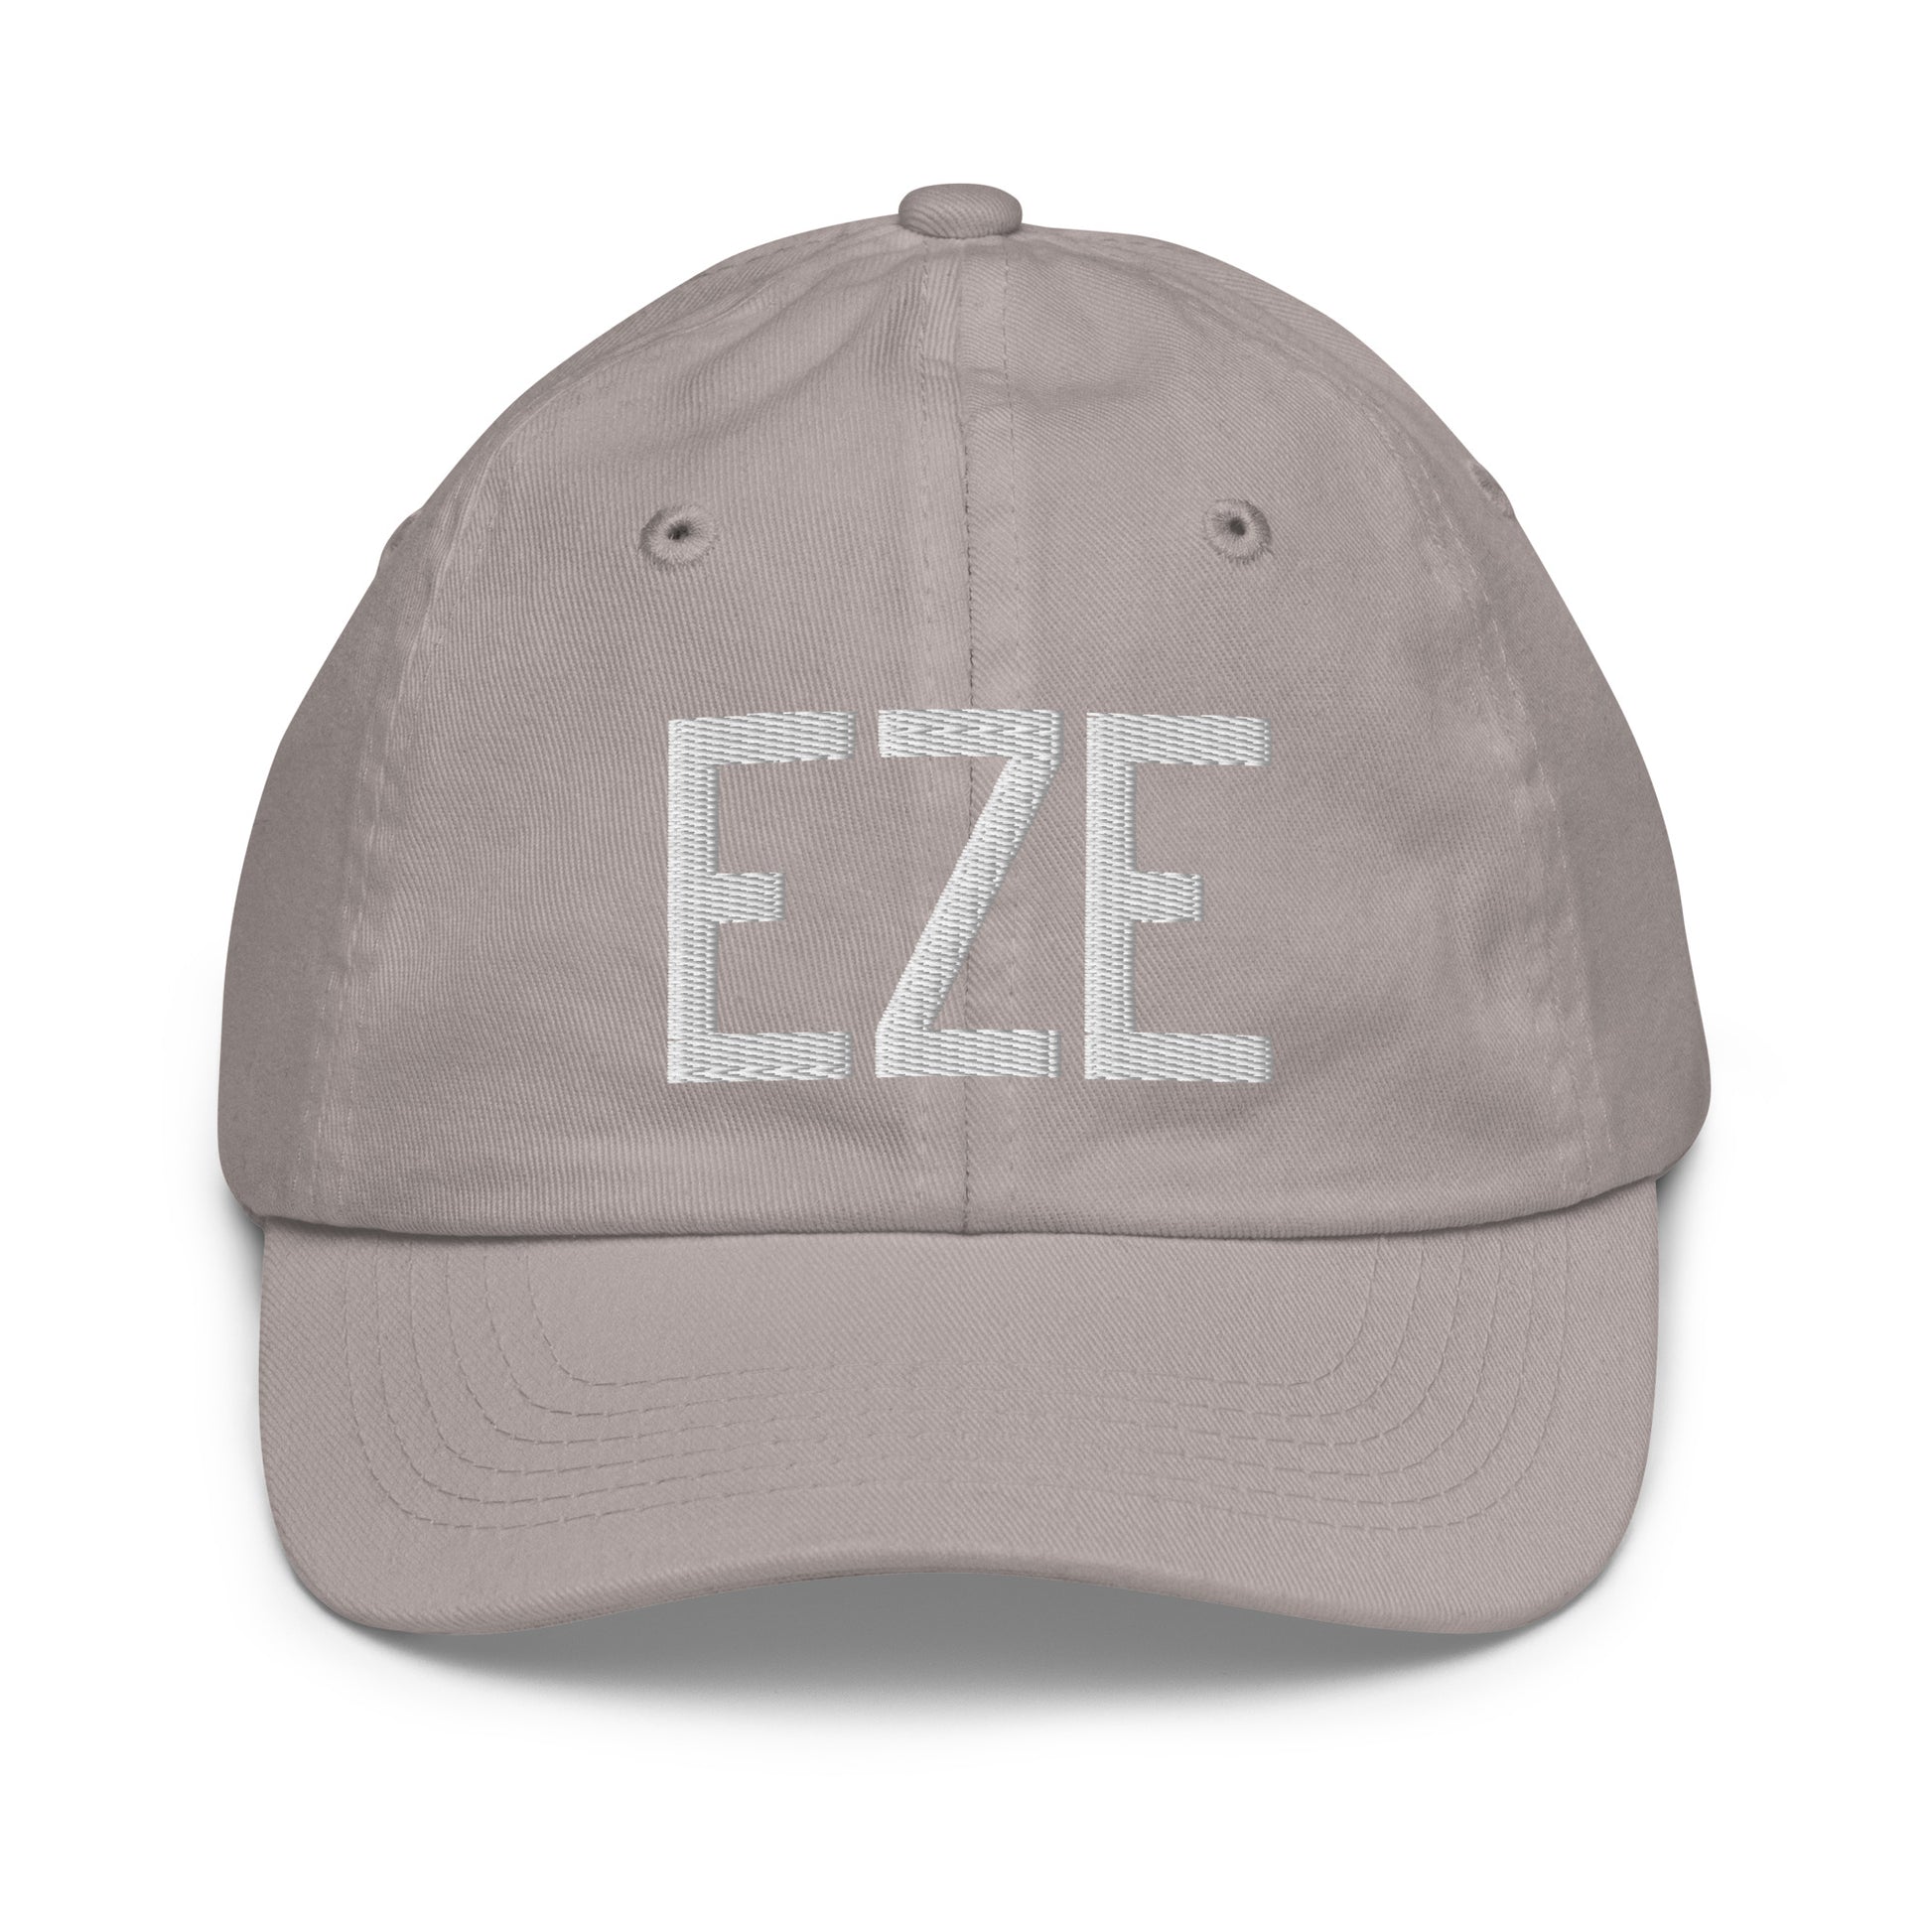 Airport Code Kid's Baseball Cap - White • EZE Buenos Aires • YHM Designs - Image 25